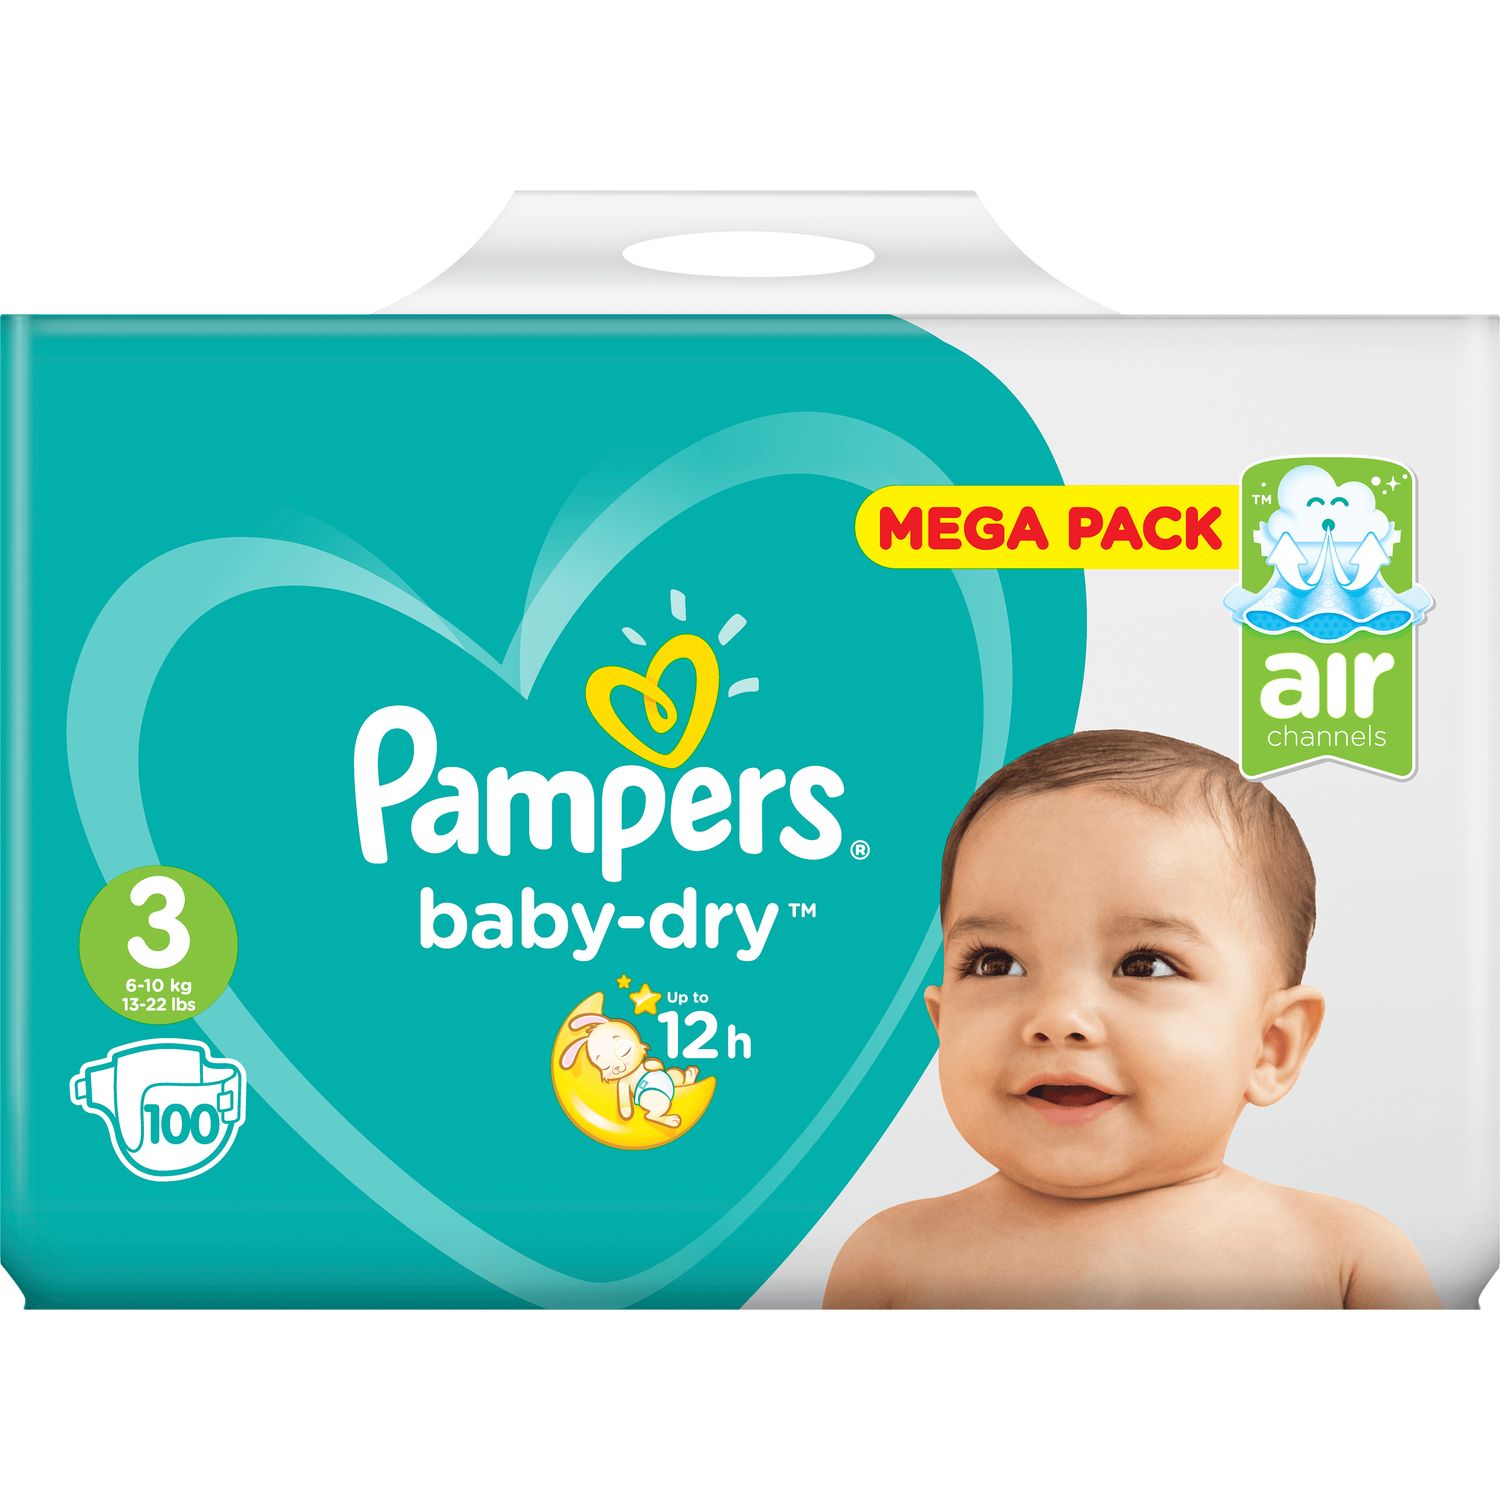 PAMPERS Baby-dry couche taille 3 (6-10Kg) MEGA PACK x112 couches 